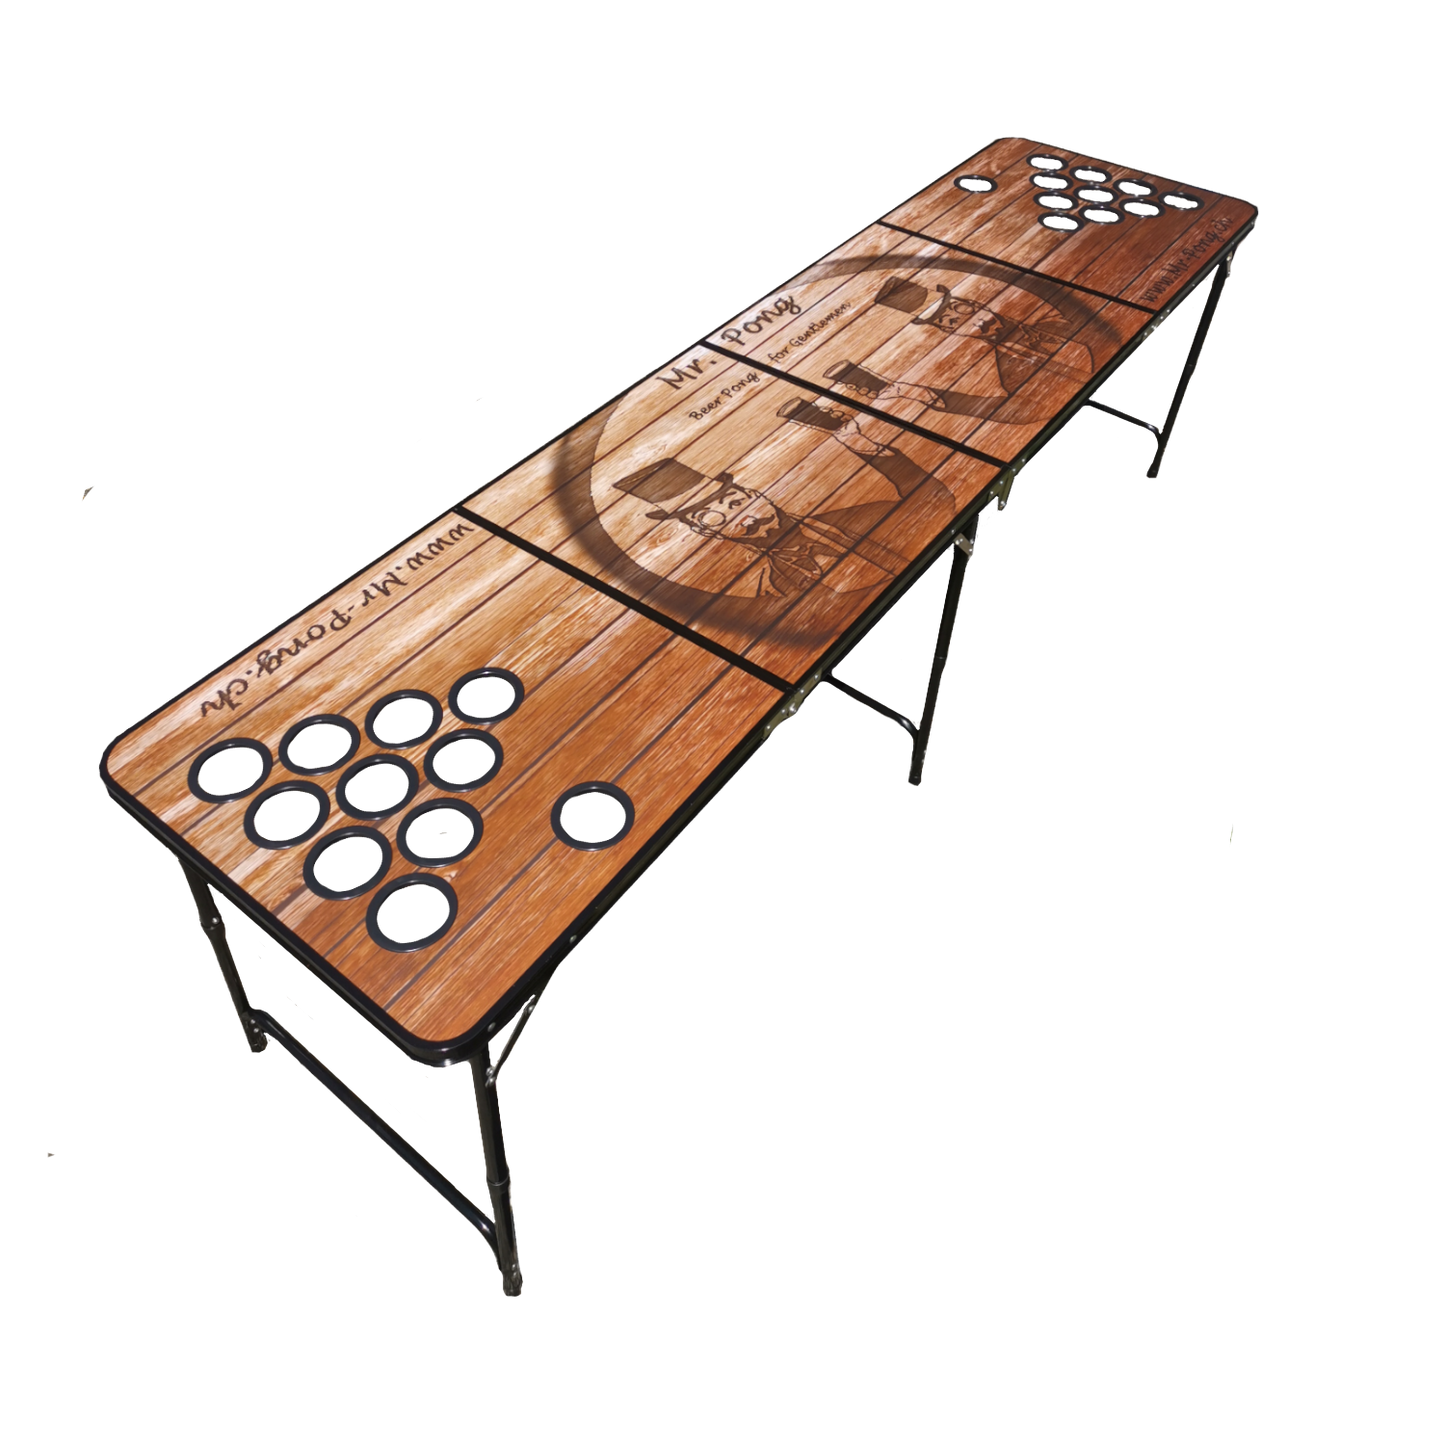 The Oak Beer Pong Table